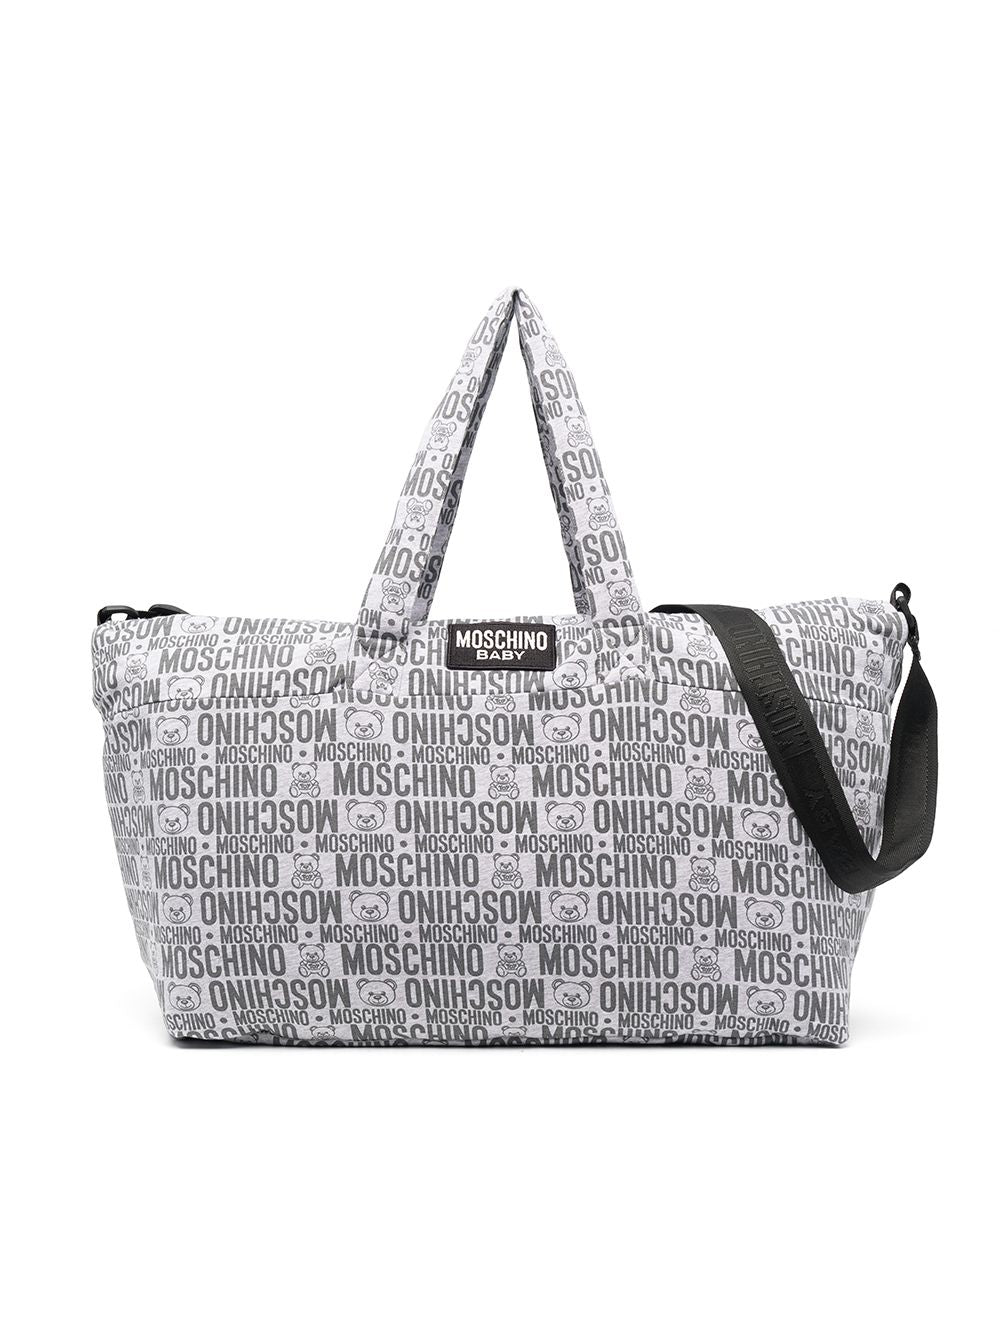 BABY CHANGING BAG W MAT AND LOGO PRINT ALLOVER,GREY - Cémarose Canada